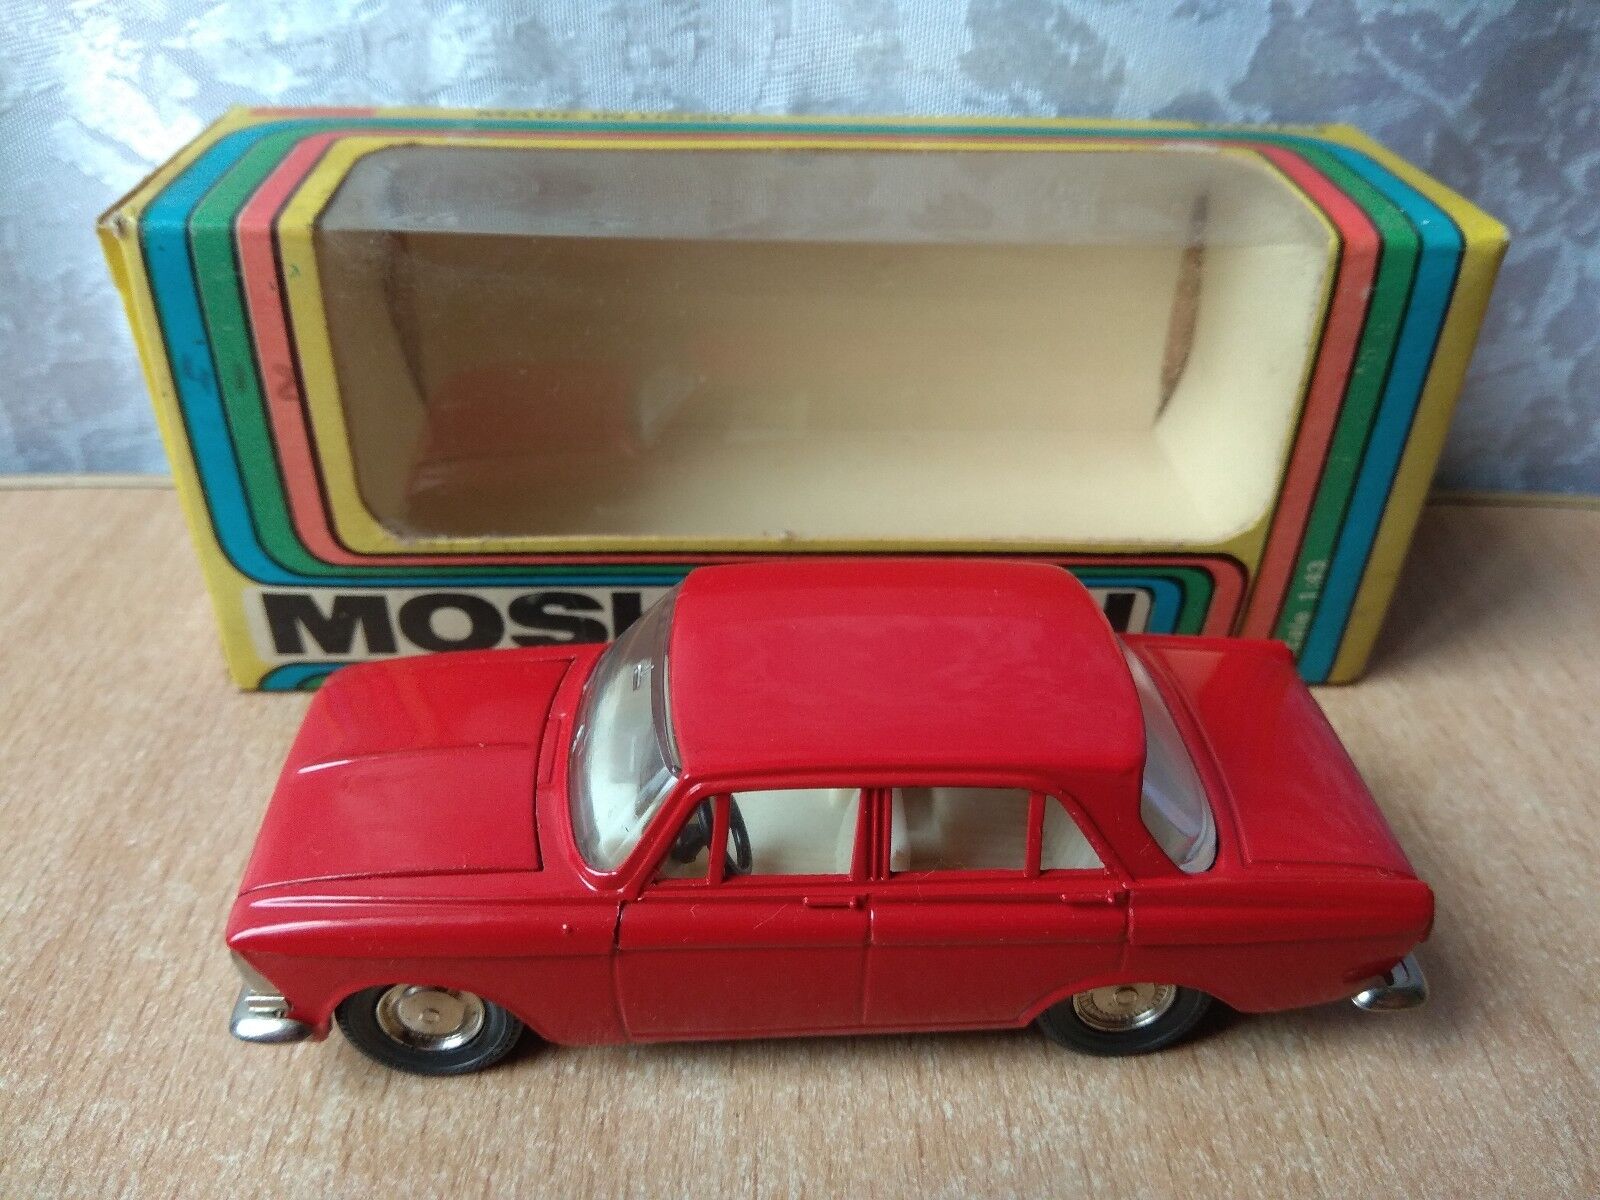 Vintage metal toy soviet car СССР 1:43 model USSR Moskvich 412 A 2 in box Tanie oferty